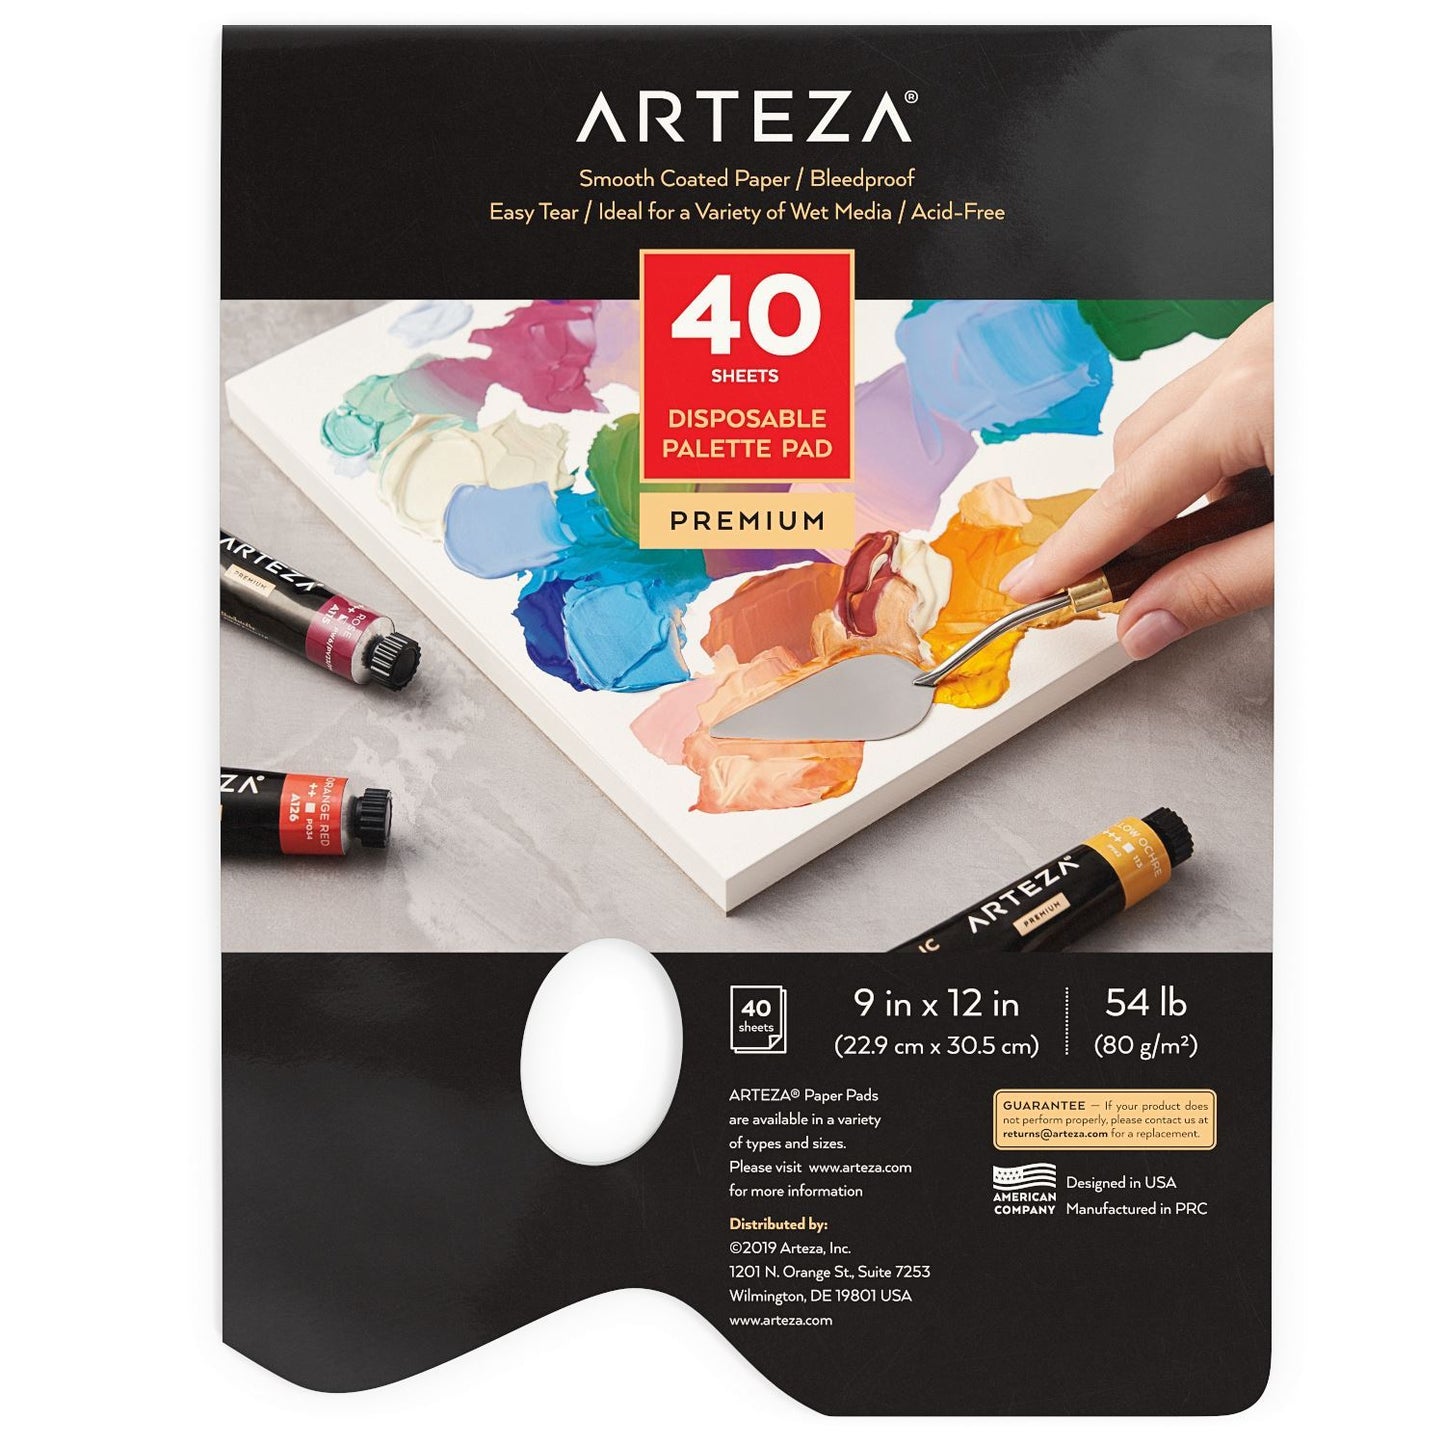 EBIVEN Disposable Palette Pad Coated Paper for Oil Paints Mixing, 9'' x 12'', Pack of 40 Sheets (9 x 12(40 Sheets))